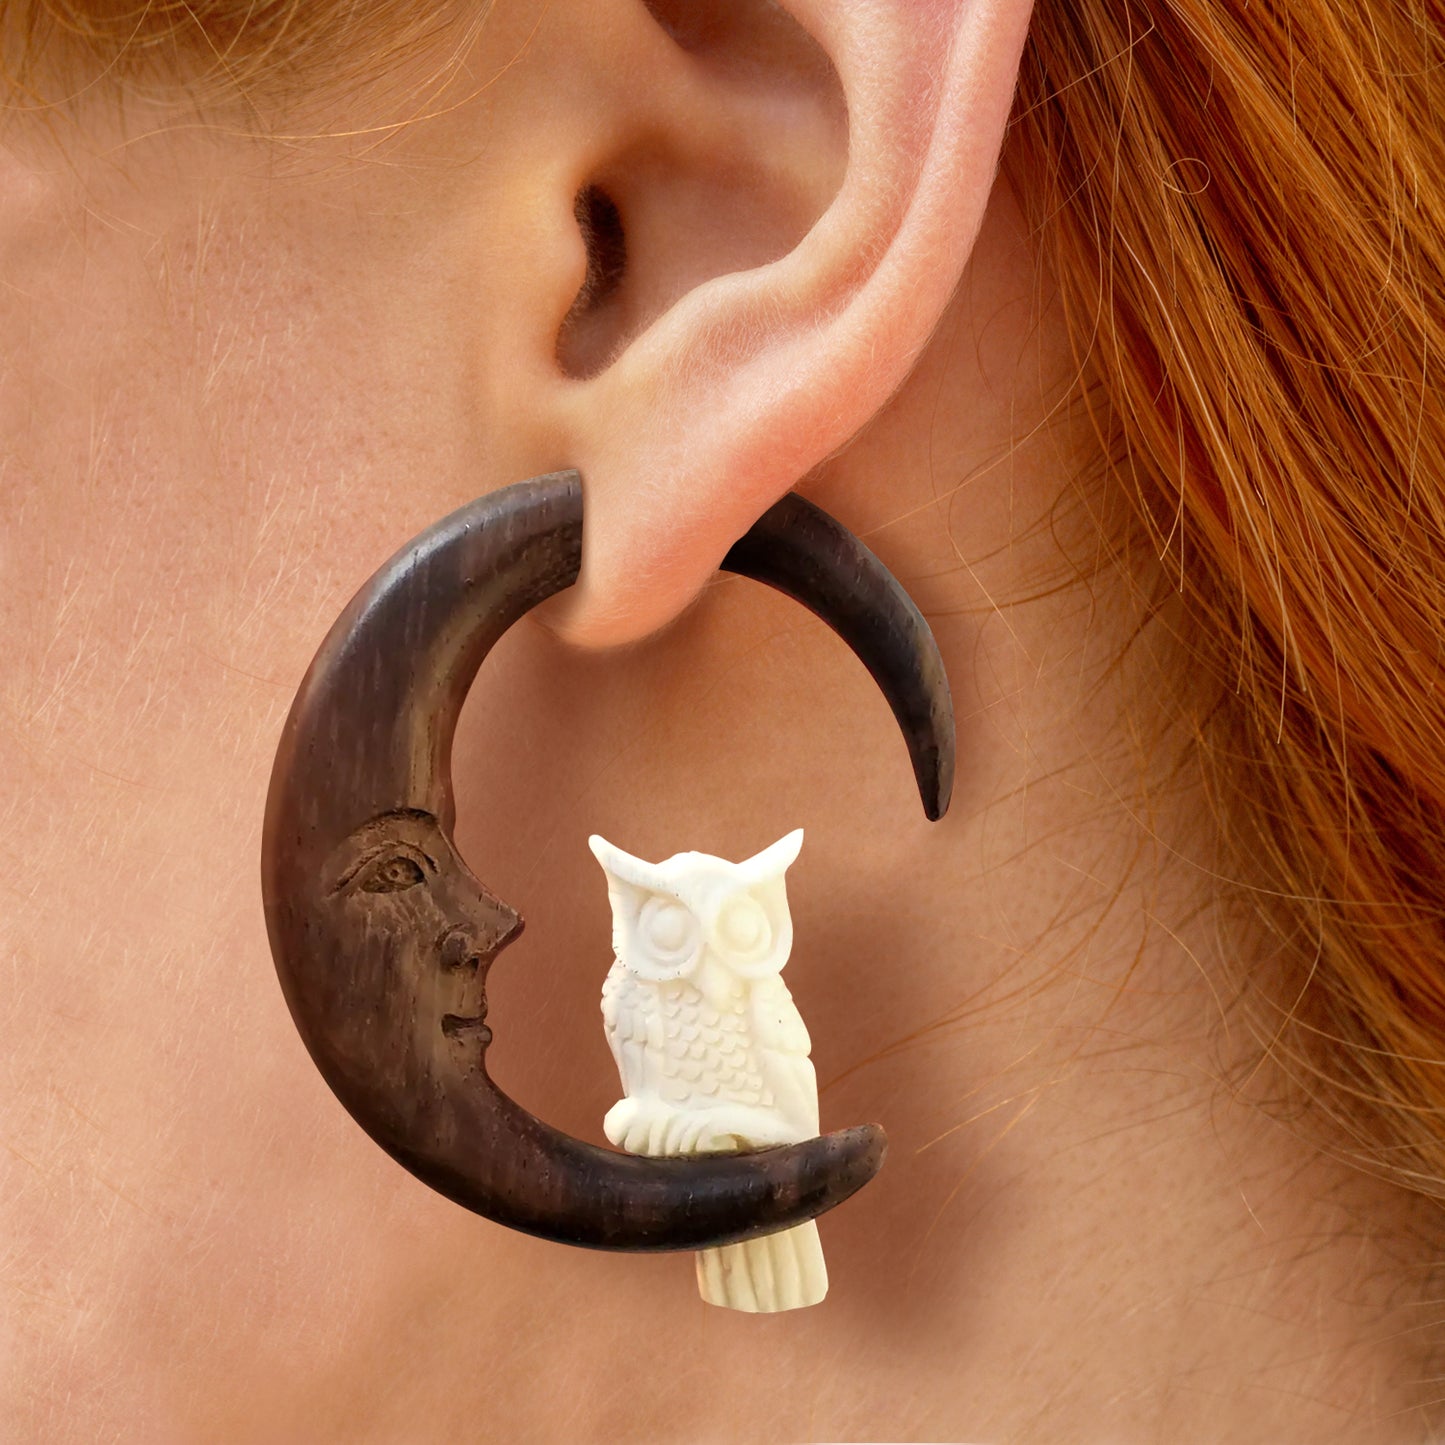 Load image into Gallery viewer, Close up of a model’s ear, with a wooden earring dangling from her earlobe. The earring is shaped like a crescent moon, with a small white owl at the bottom. The inside of the crescent moon shows a smiling face.
